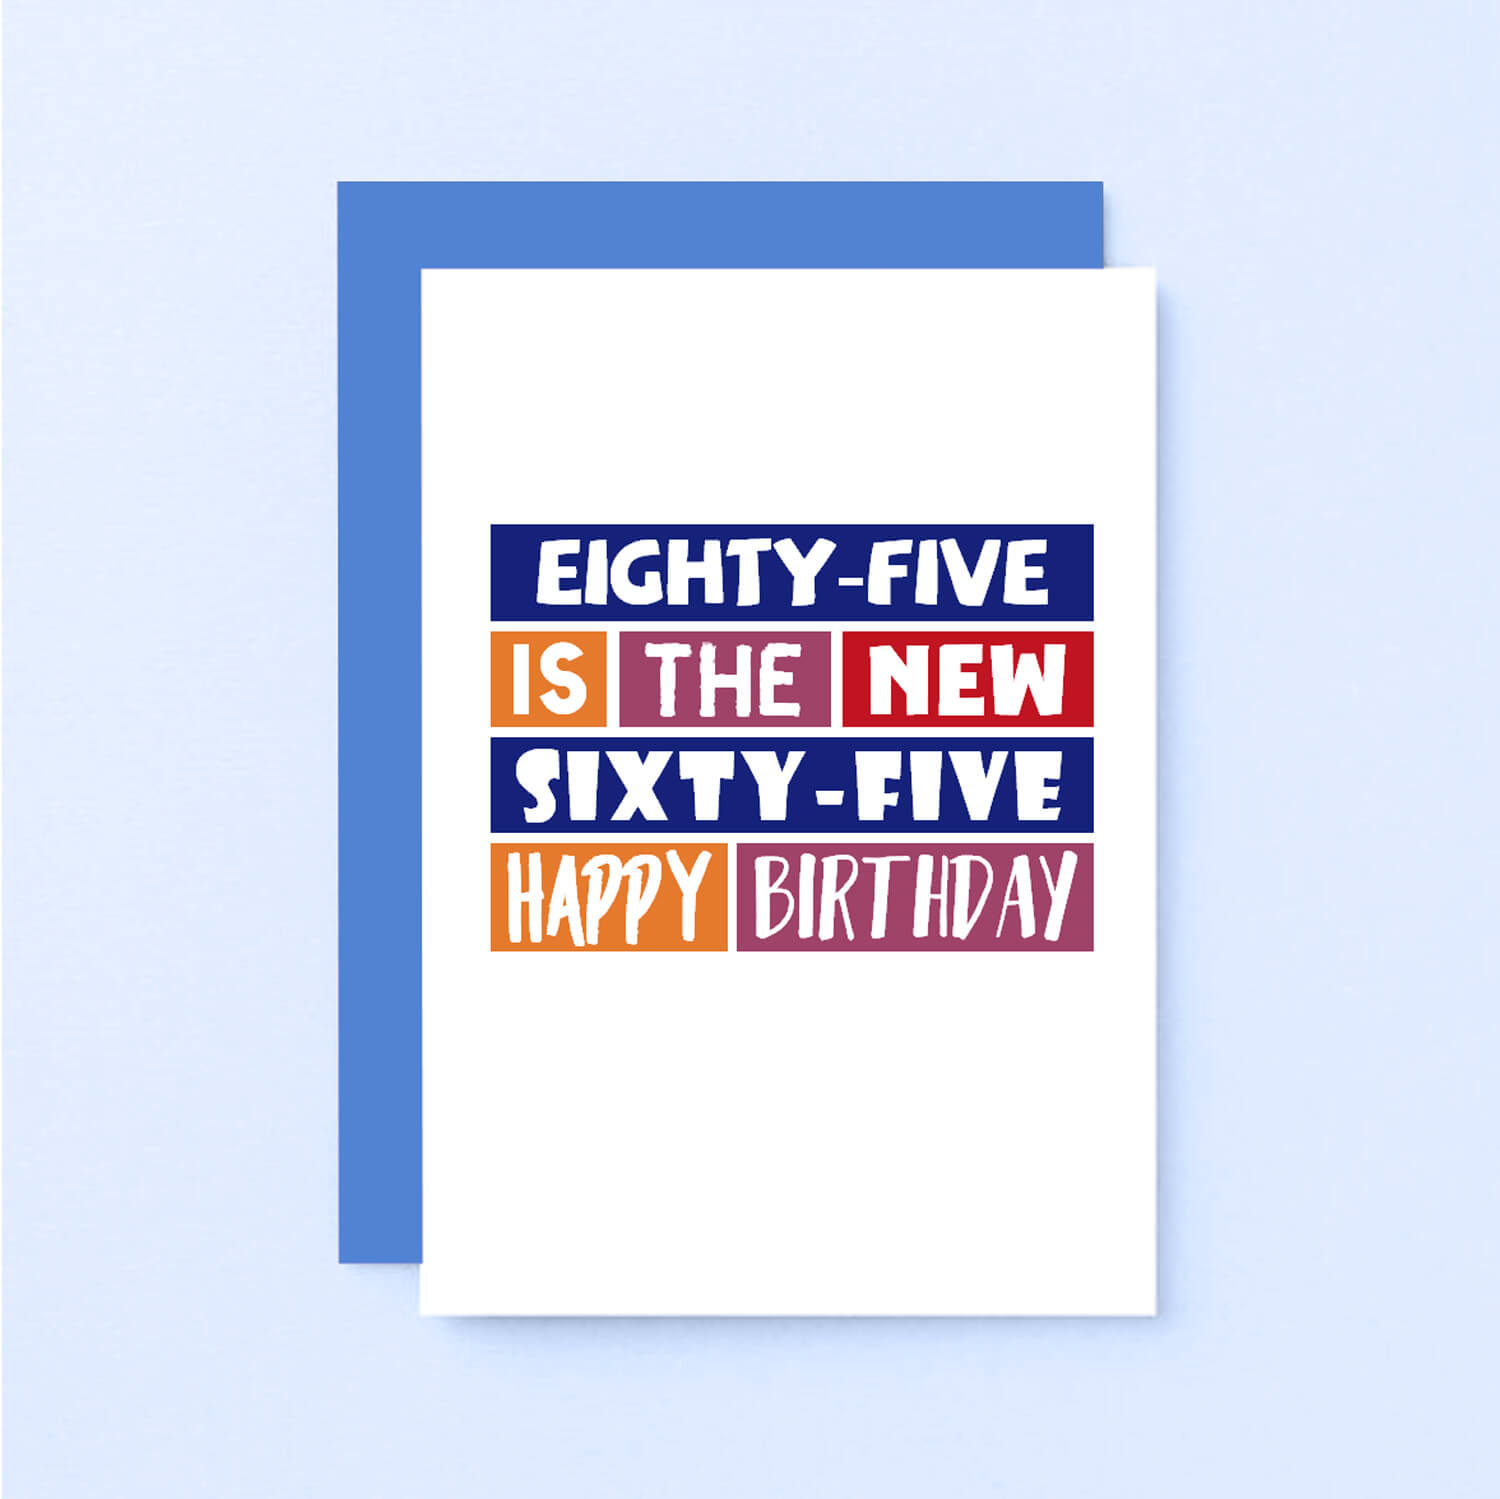 85th Birthday Card by SixElevenCreations. Reads Eighty-five is the new sixty-five Happy birthday. Product Code SE0296A6